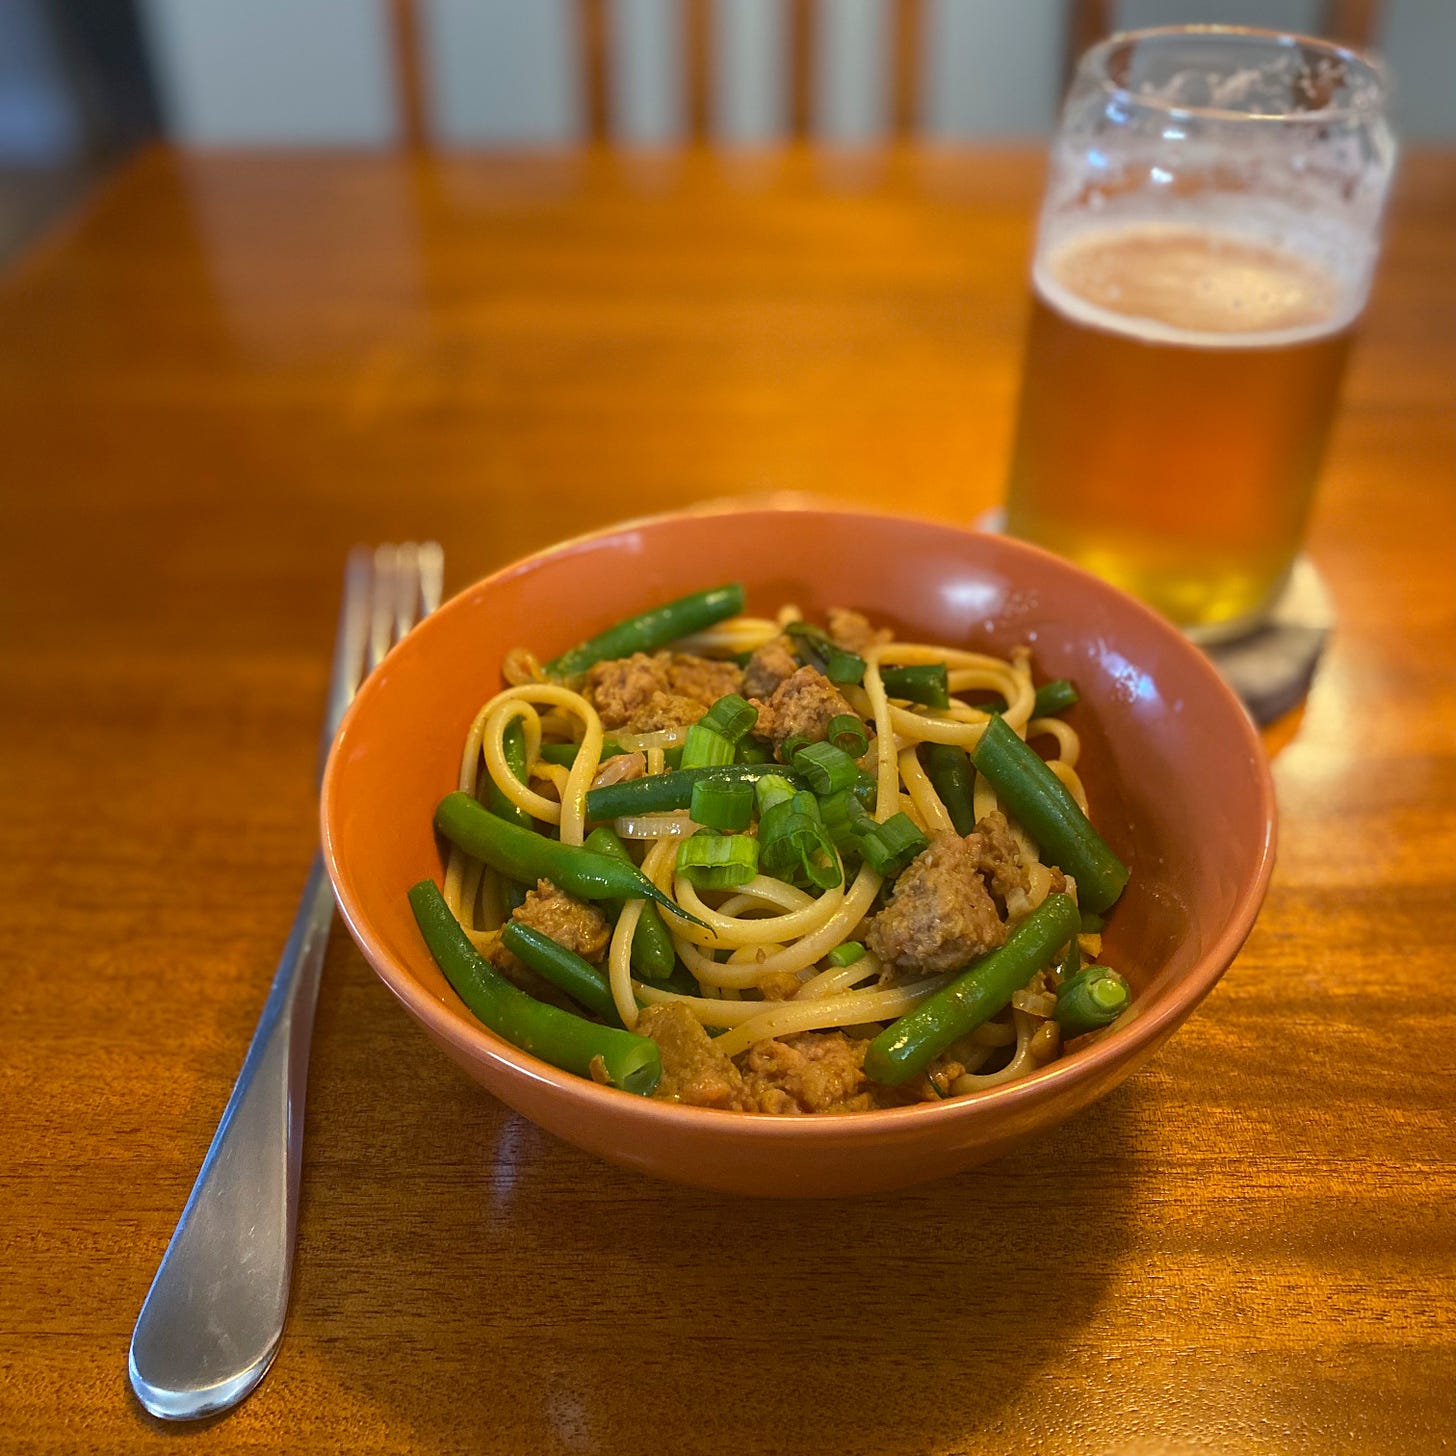 An orange bowl of the drunken noodles, with pieces of green beans and beyond meat throughout. Sliced green onions garnish the top, and a glass of beer sits on a coaster behind the bowl.